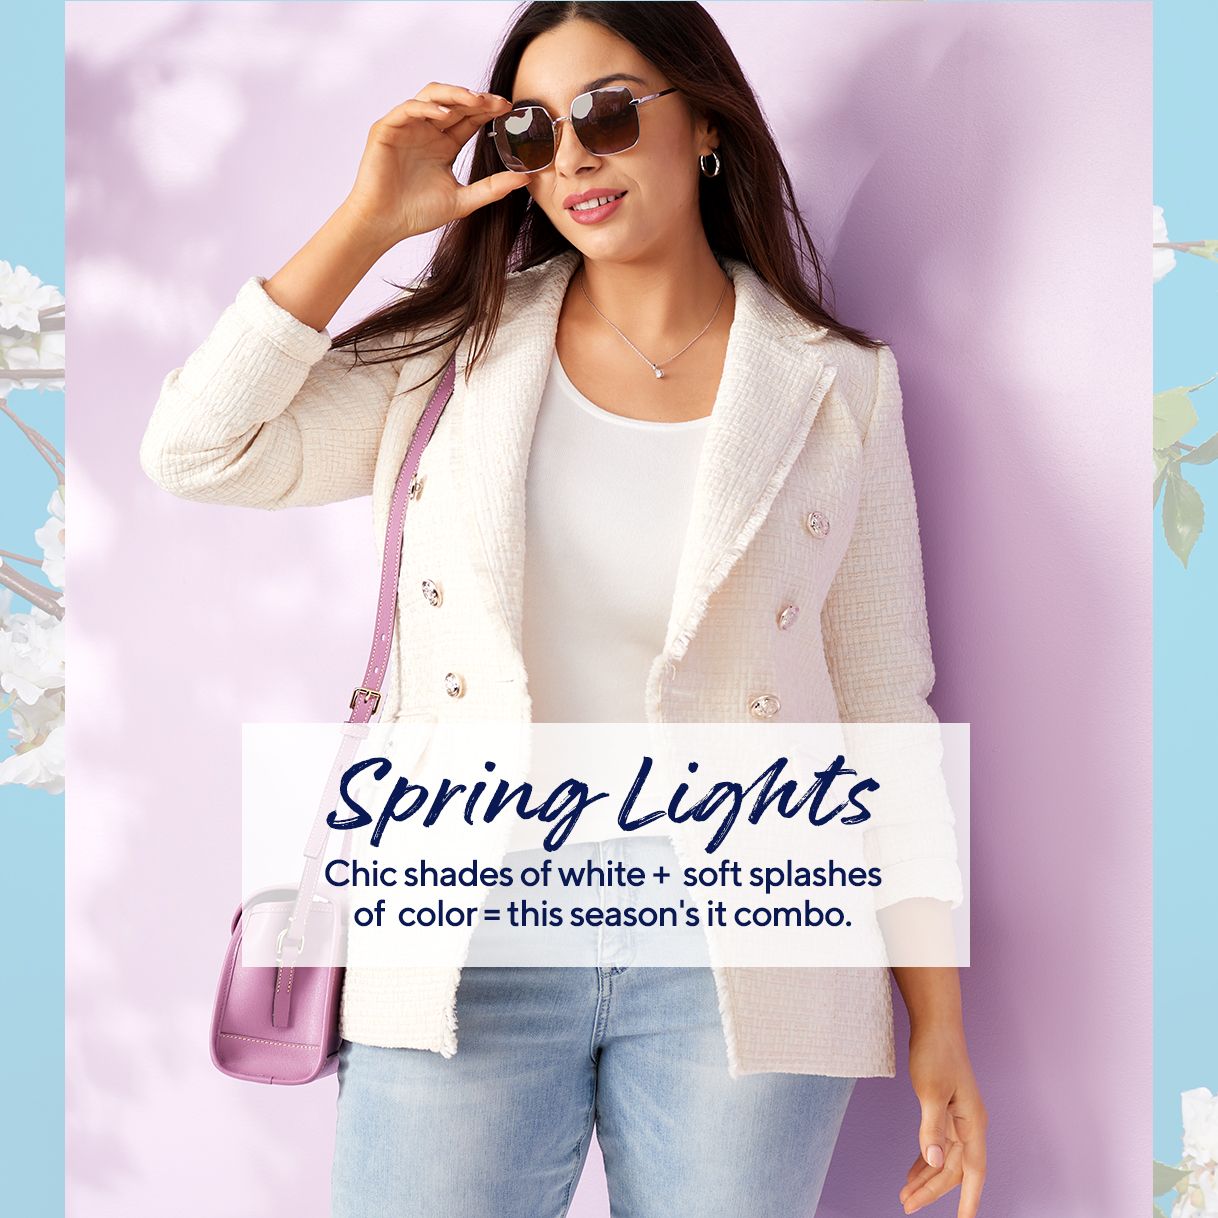 Spring Lights. Chic shades of white and soft splashes of color are this season's it combo.